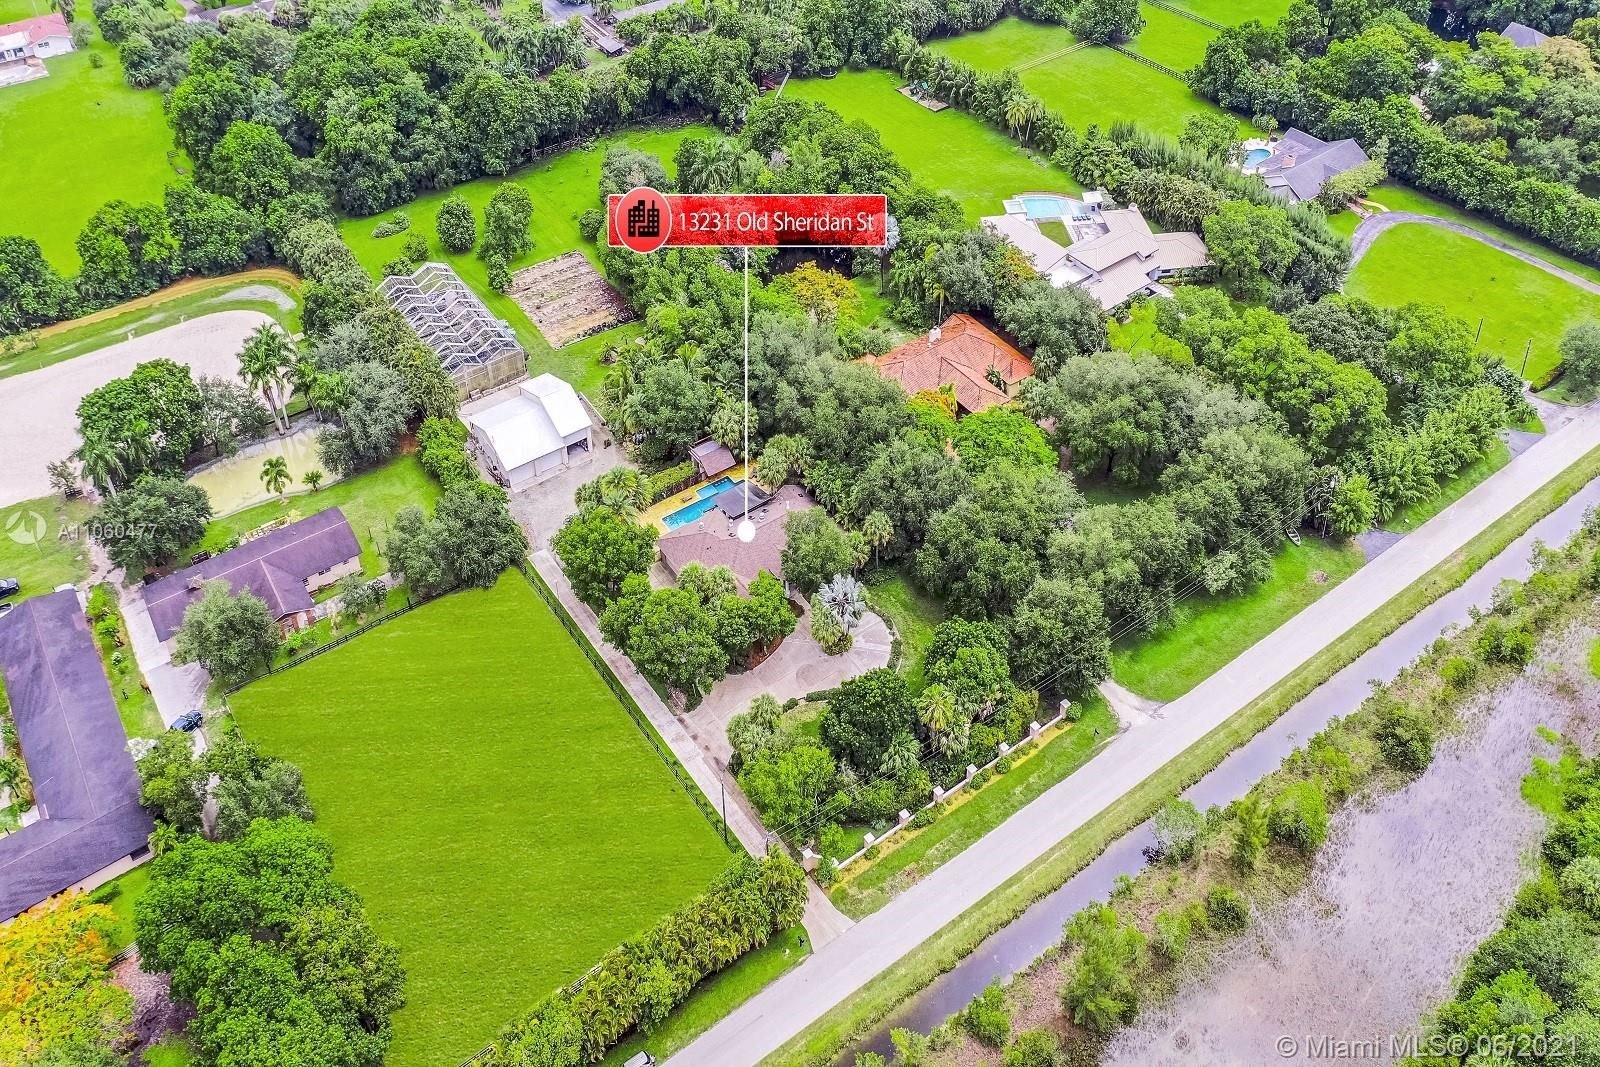 Real estate property located at 13231 Old Sheridan St, Broward County, Southwest Ranches, FL